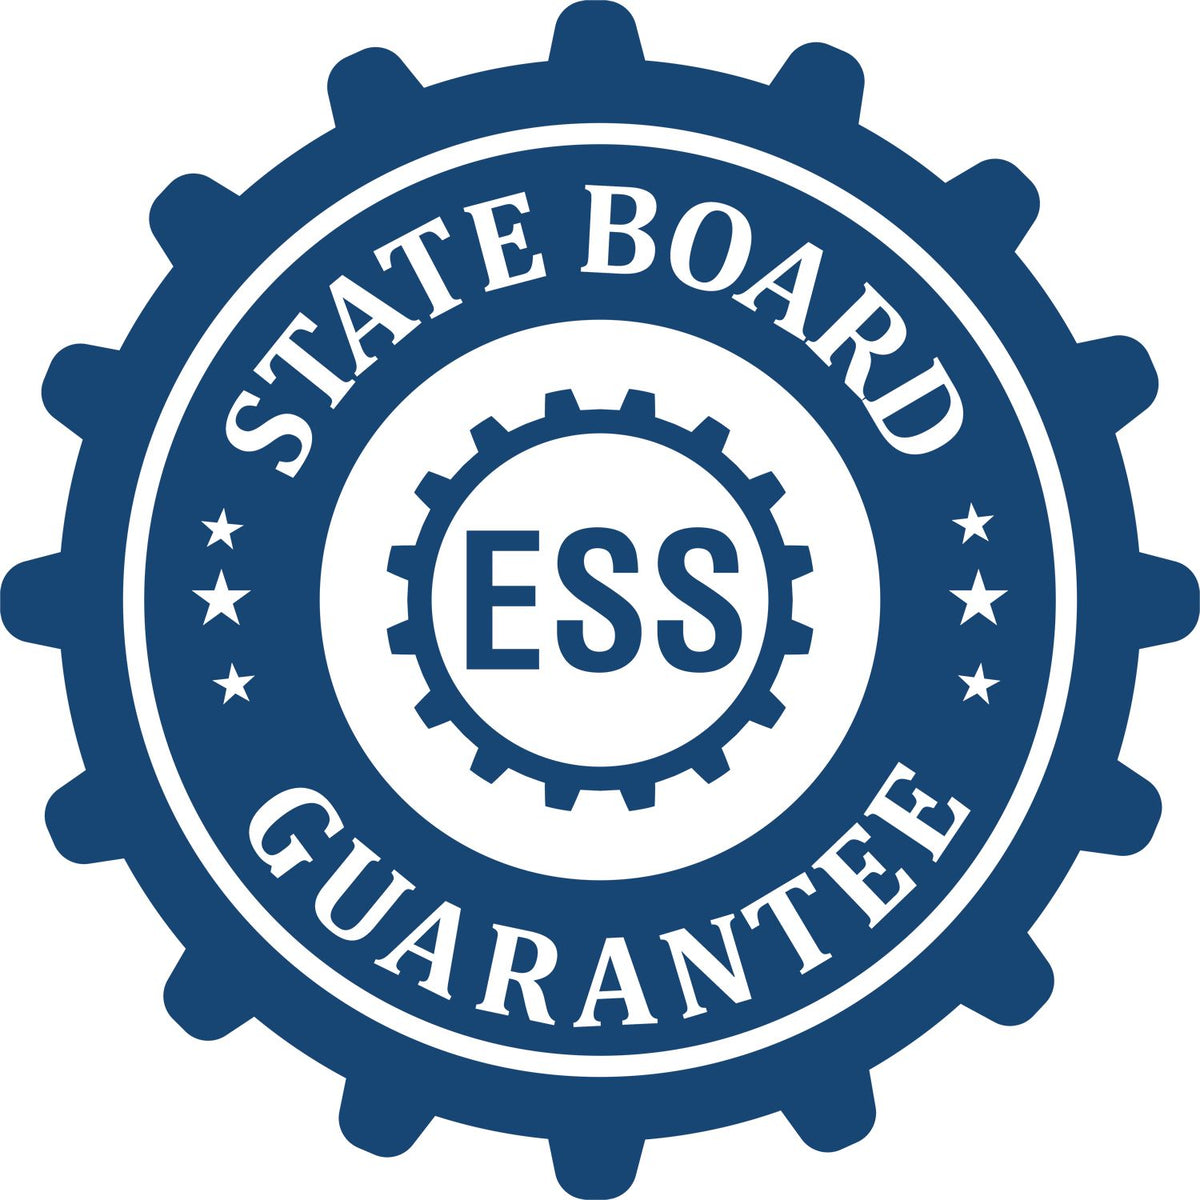 An emblem in a gear shape illustrating a state board guarantee for the Long Reach Arizona PE Seal product.